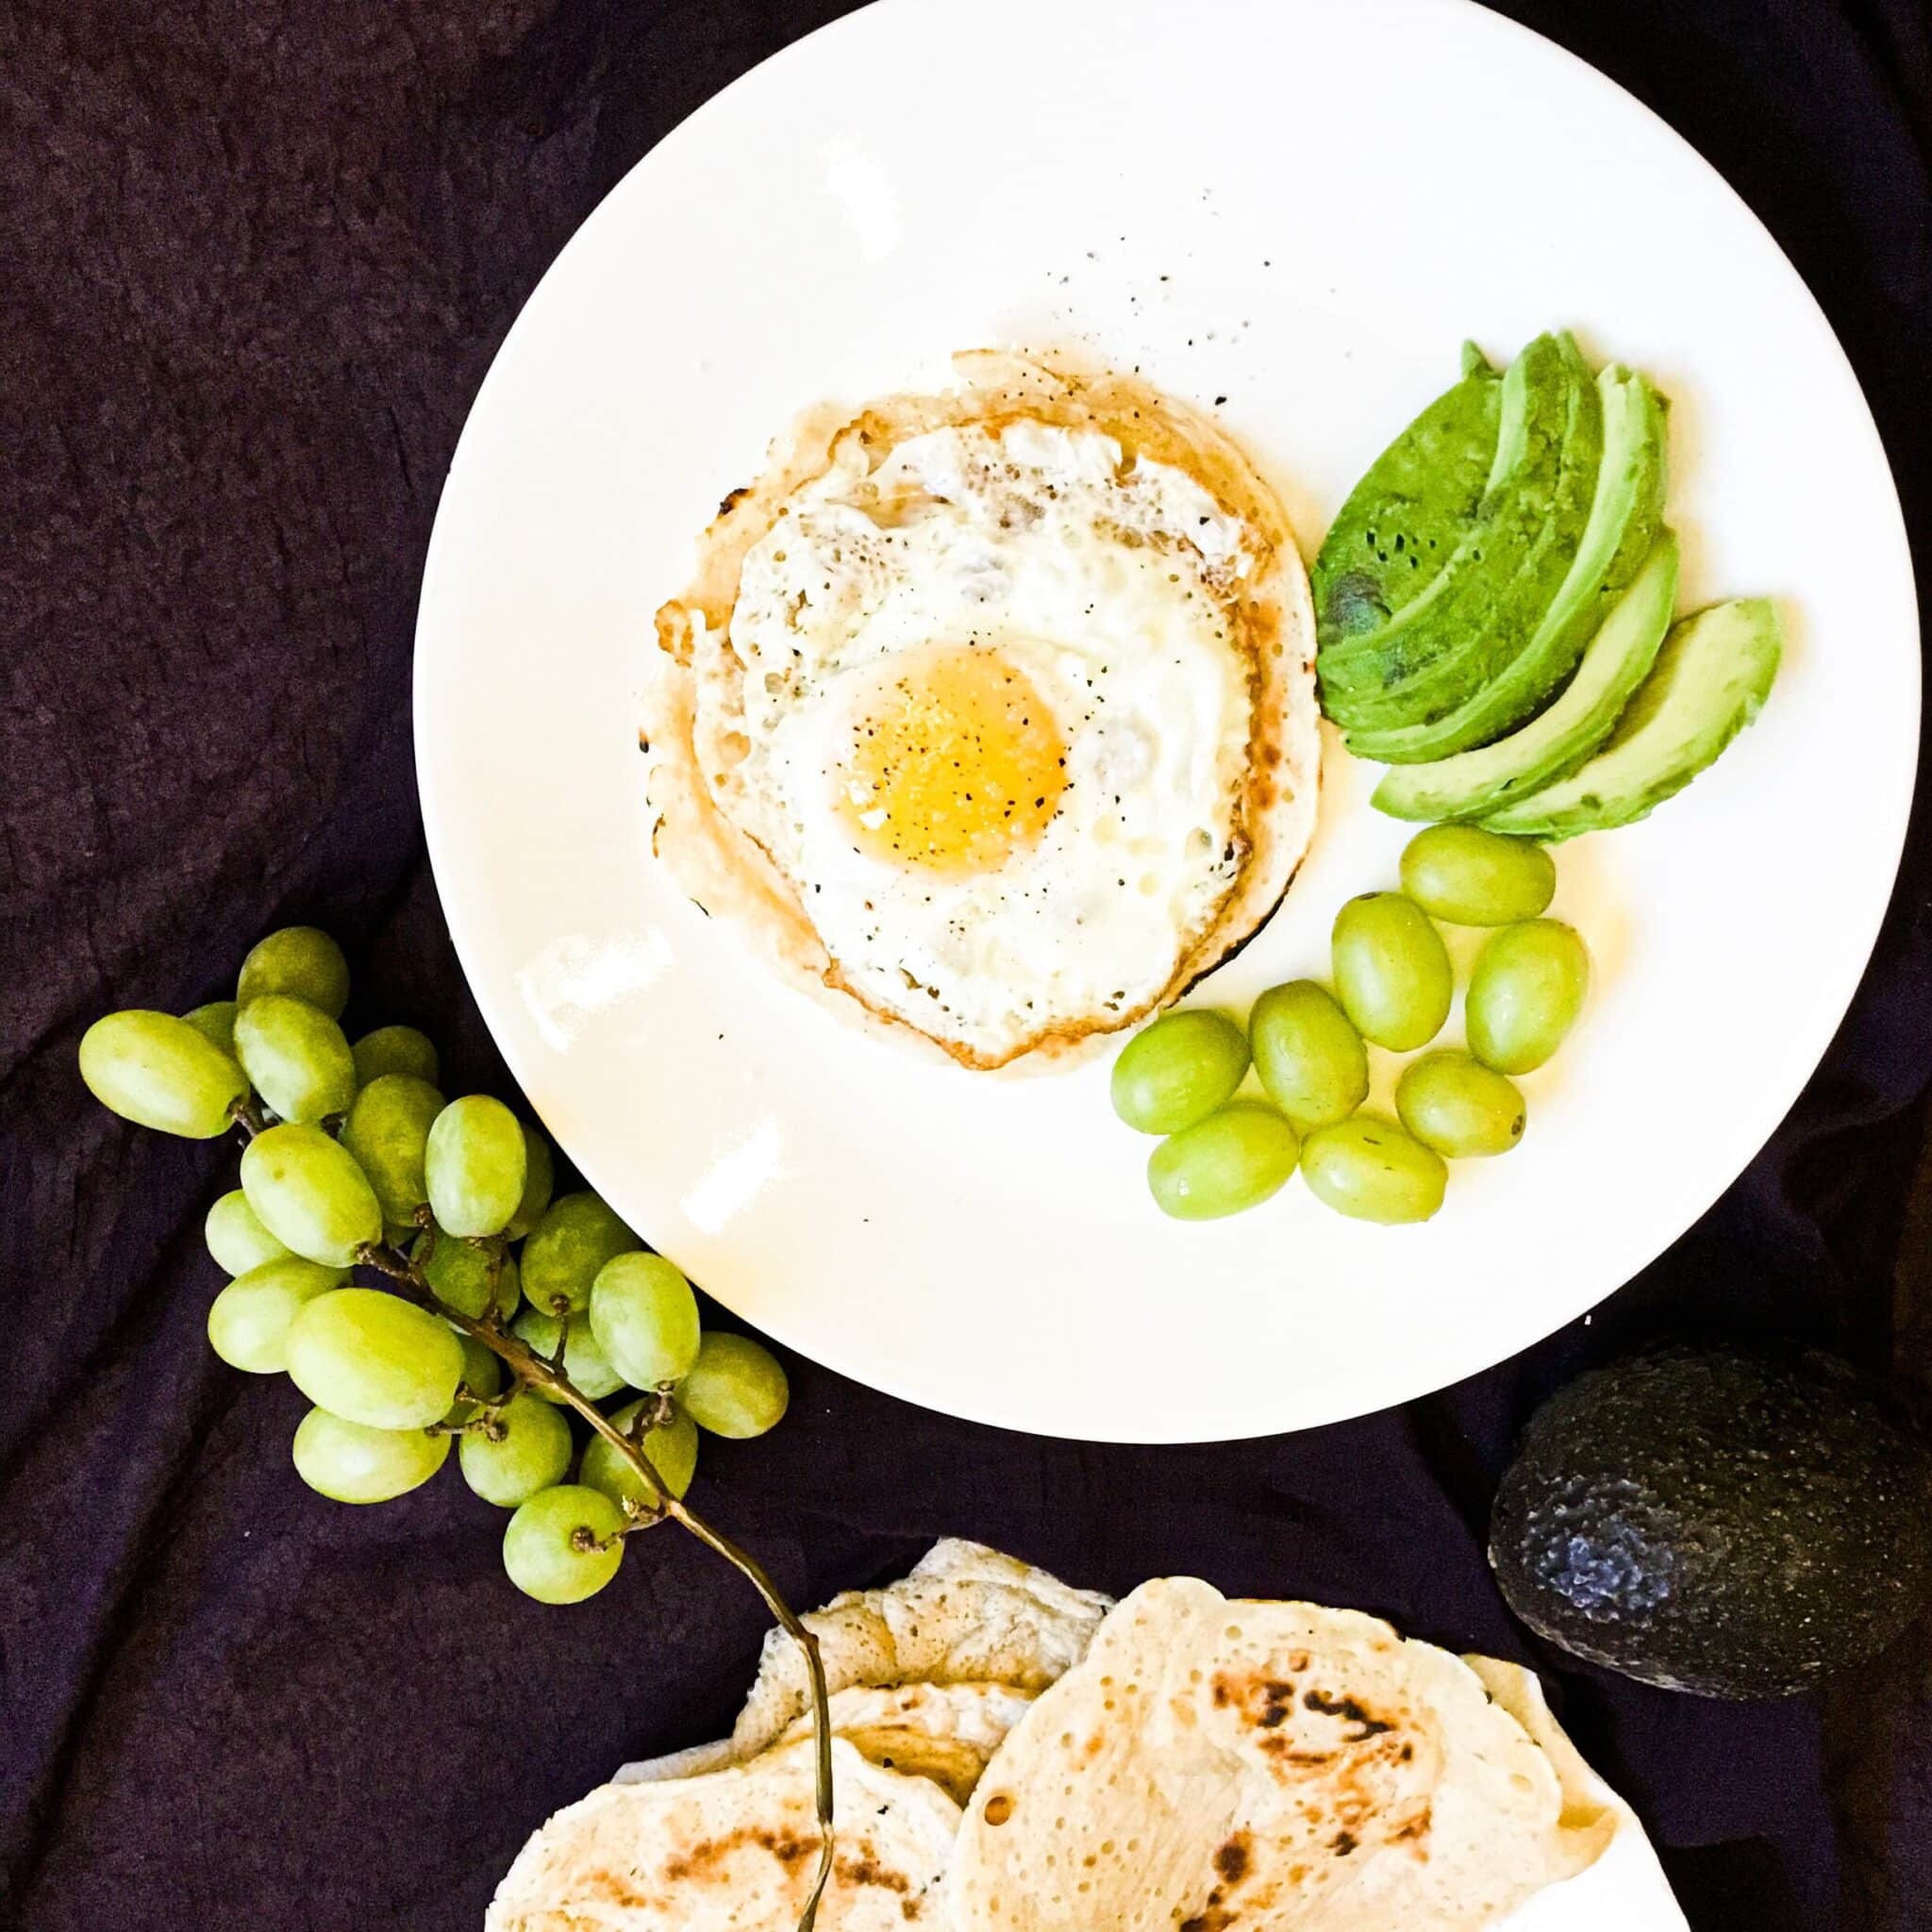 sourdough starter tortillas served with egg and avocado on a plate